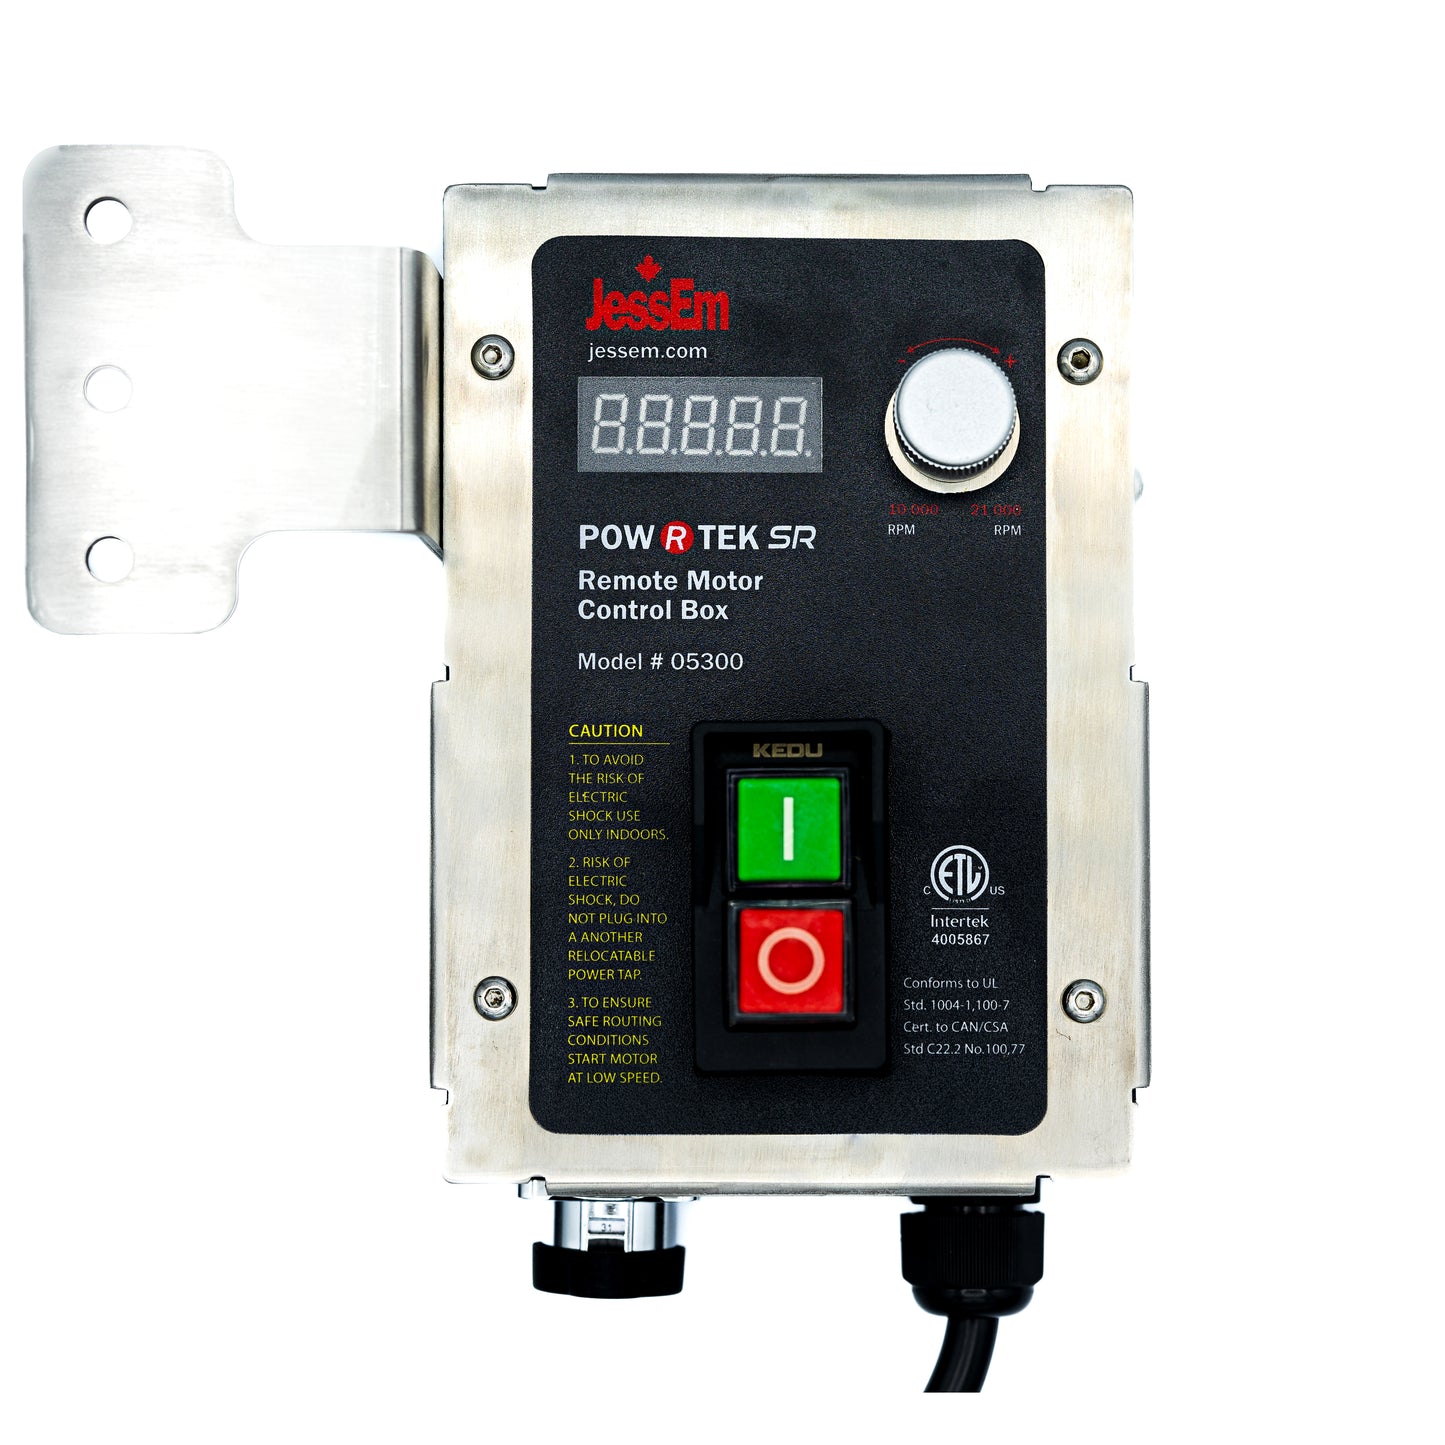 Pow-R-Tek SR™ Router with Variable Speed Control Box - ESTIMATED TO SHIP IN 4-6 WEEKS